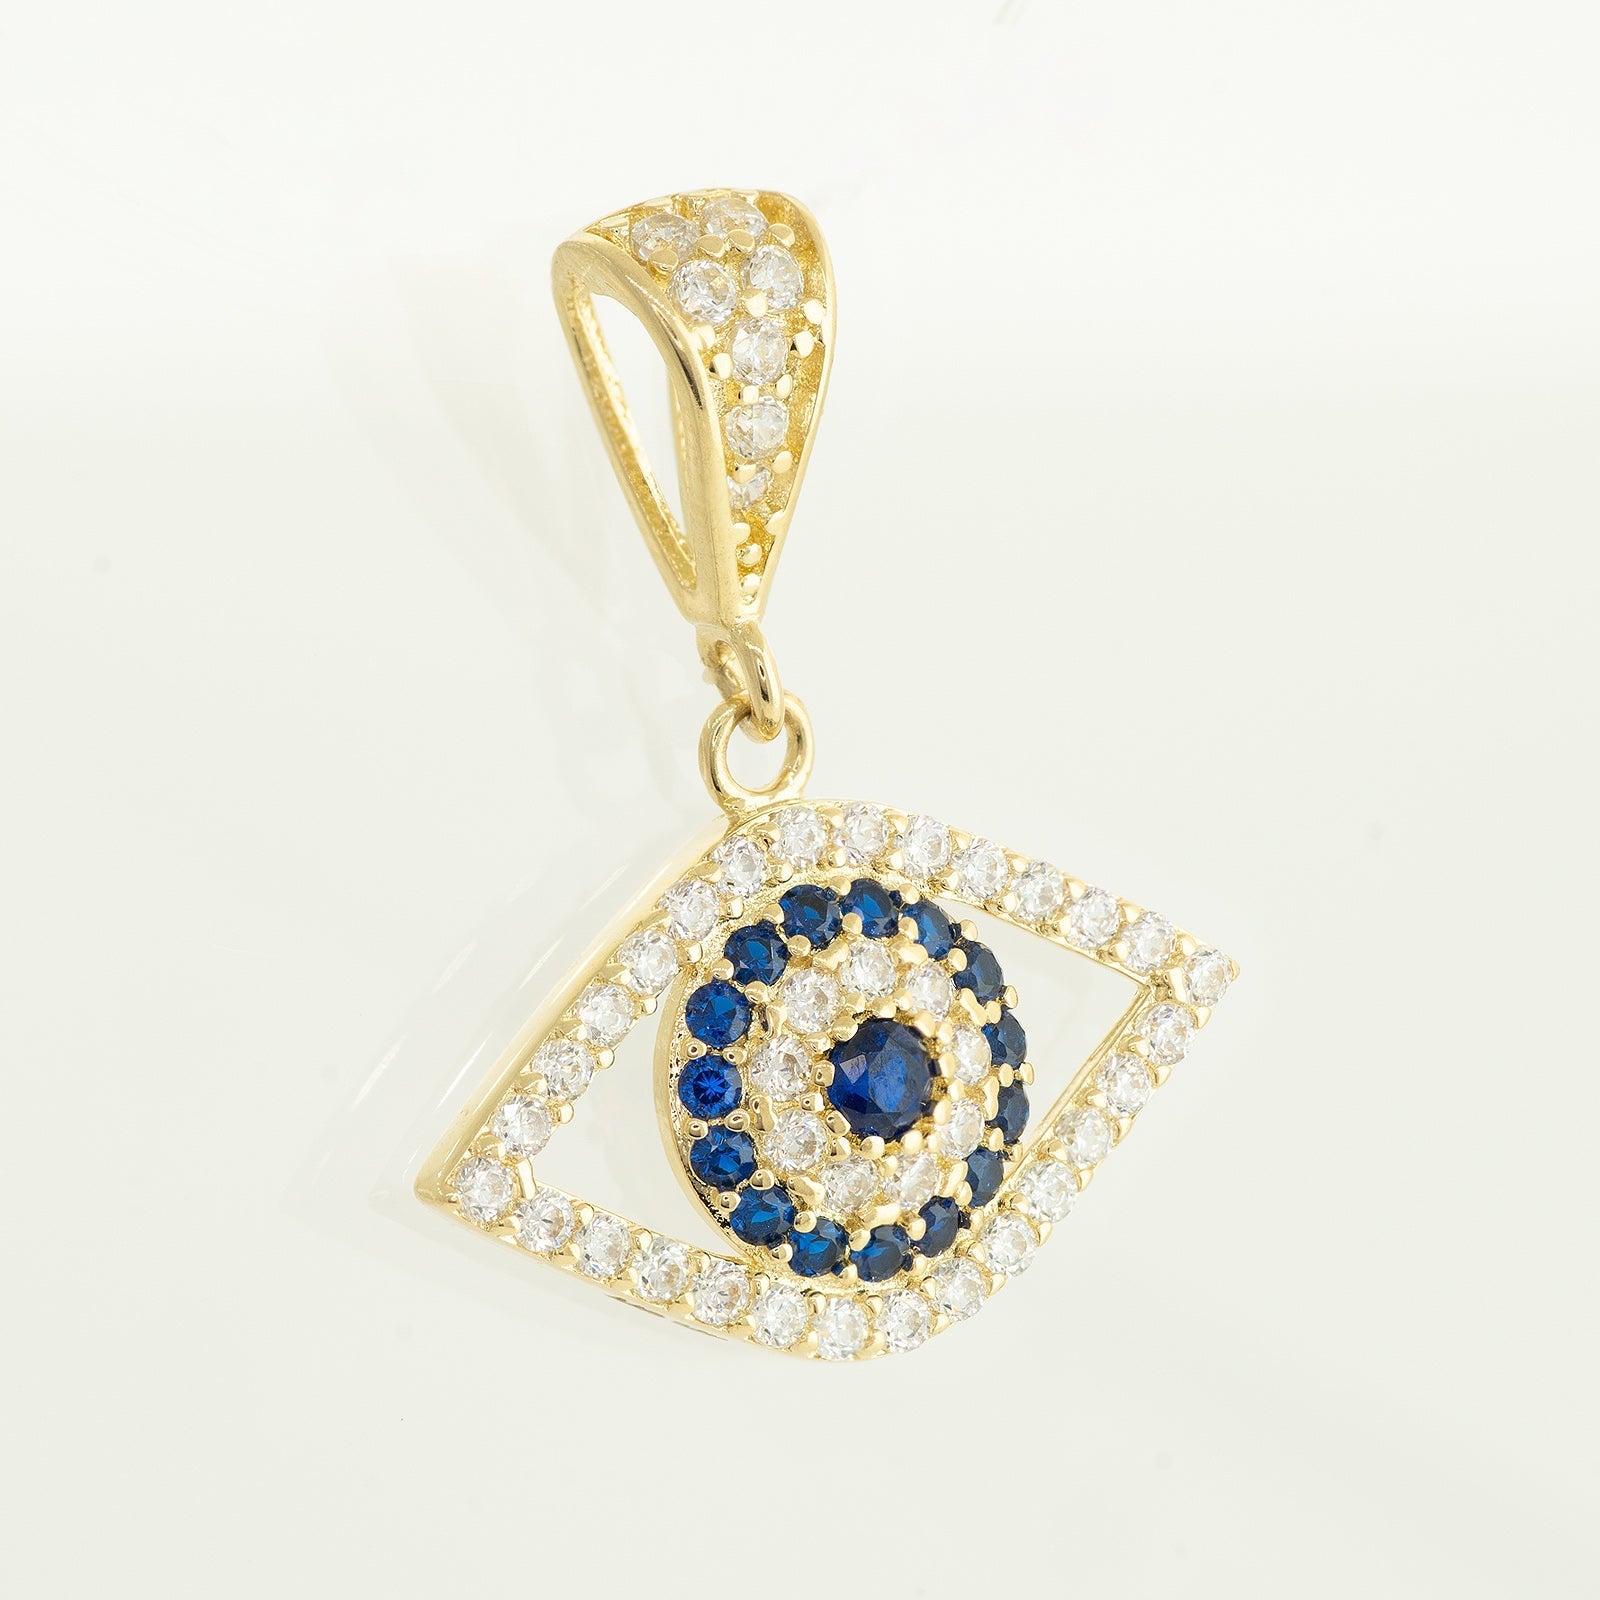 14K Solid Gold Eternity Cubic Zirconia & Blue Evil Eye Pendant - Anygolds